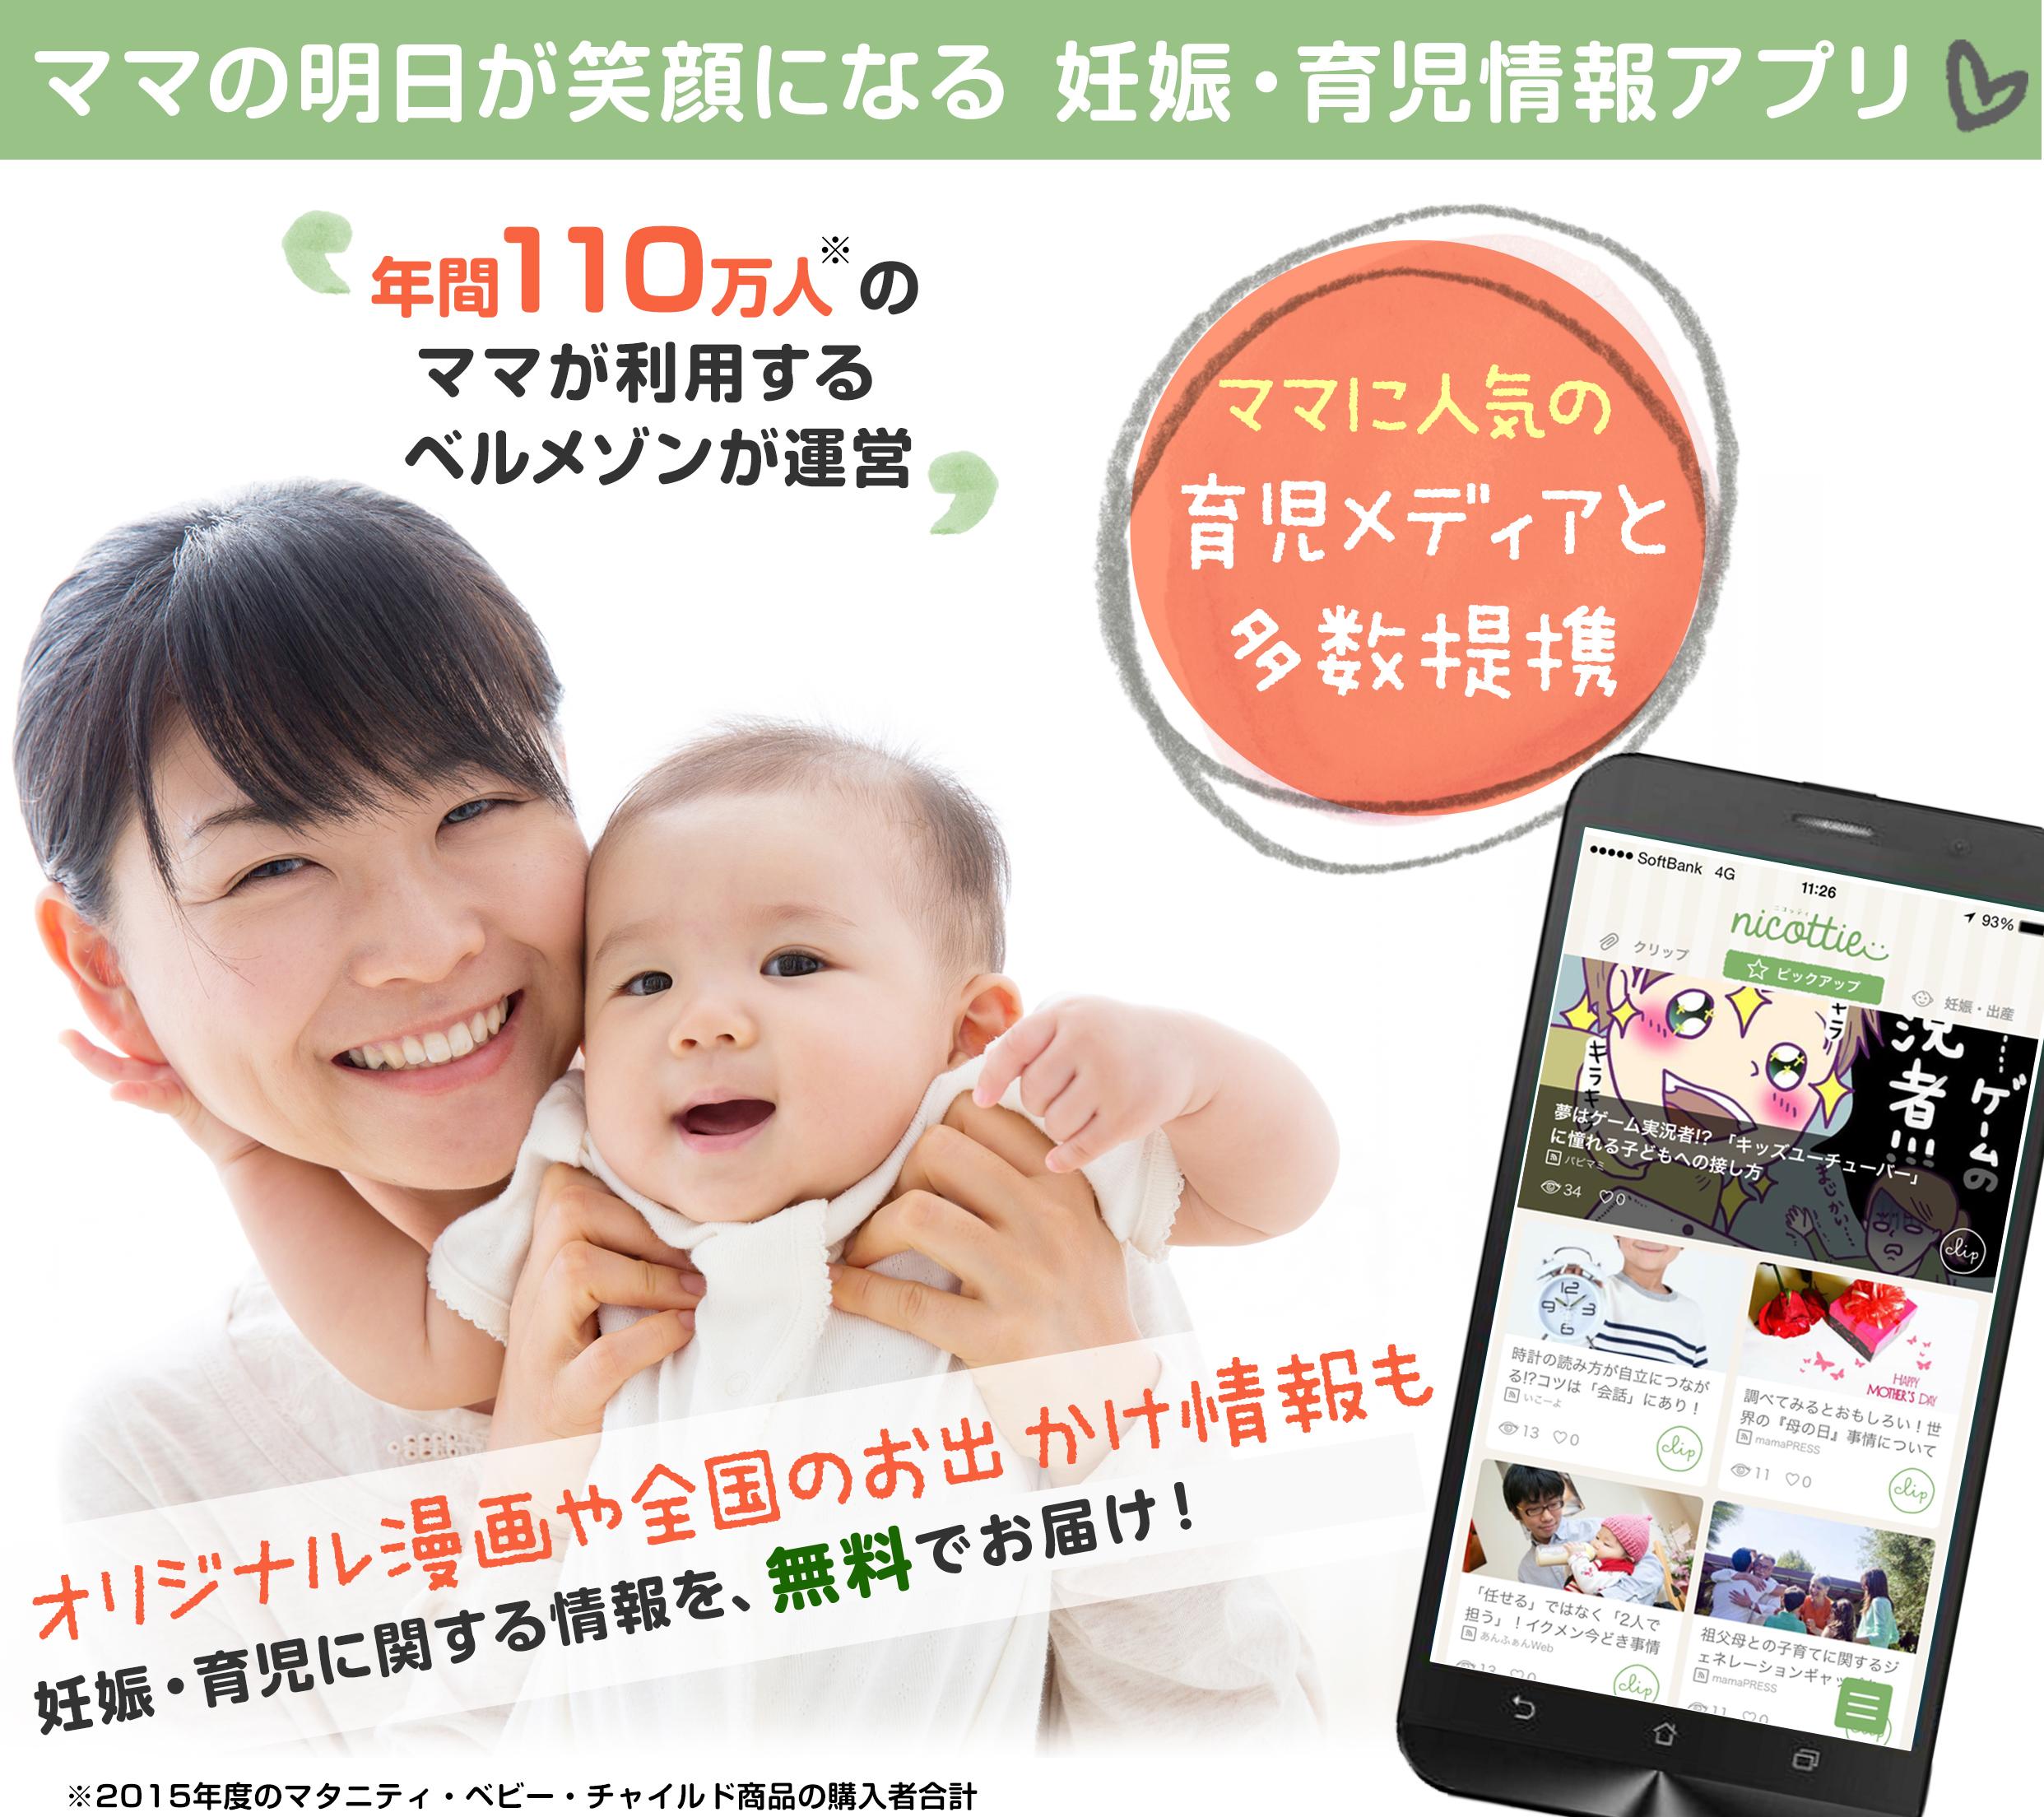 Android application nicottie-妊娠・育児情報を毎日配信【ベルメゾン公式】 screenshort